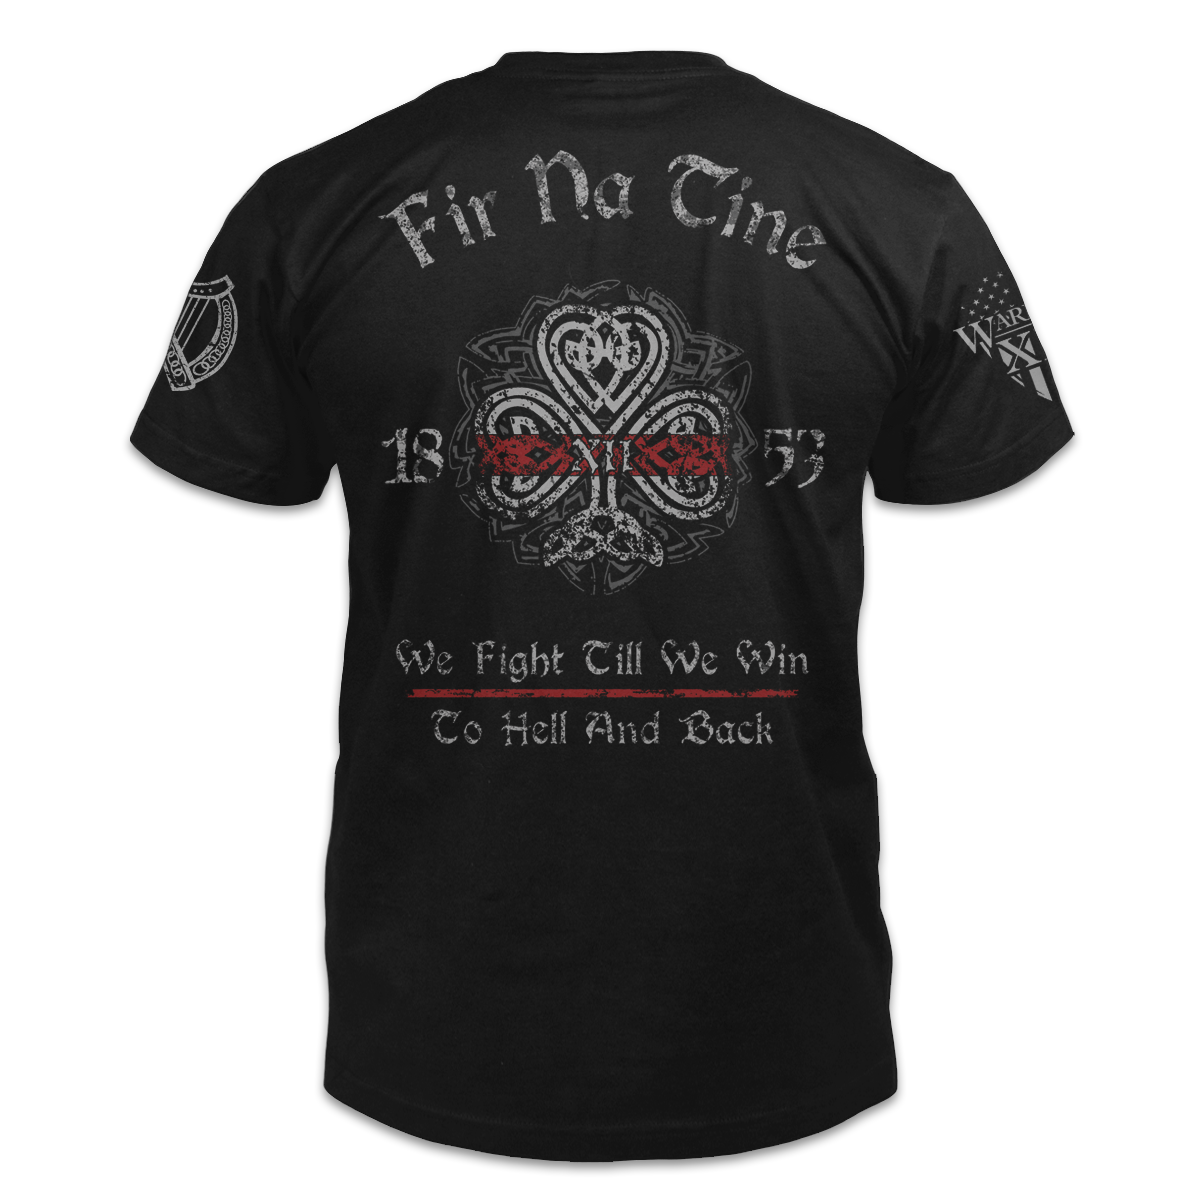 A black t-shirt pays tribute to the history and traditions of Irish firefighters, and showing true Celtic pride. Fir Na Tine, meaning, "Men of Fire" in Gaelic, is written across the back of the shirt.